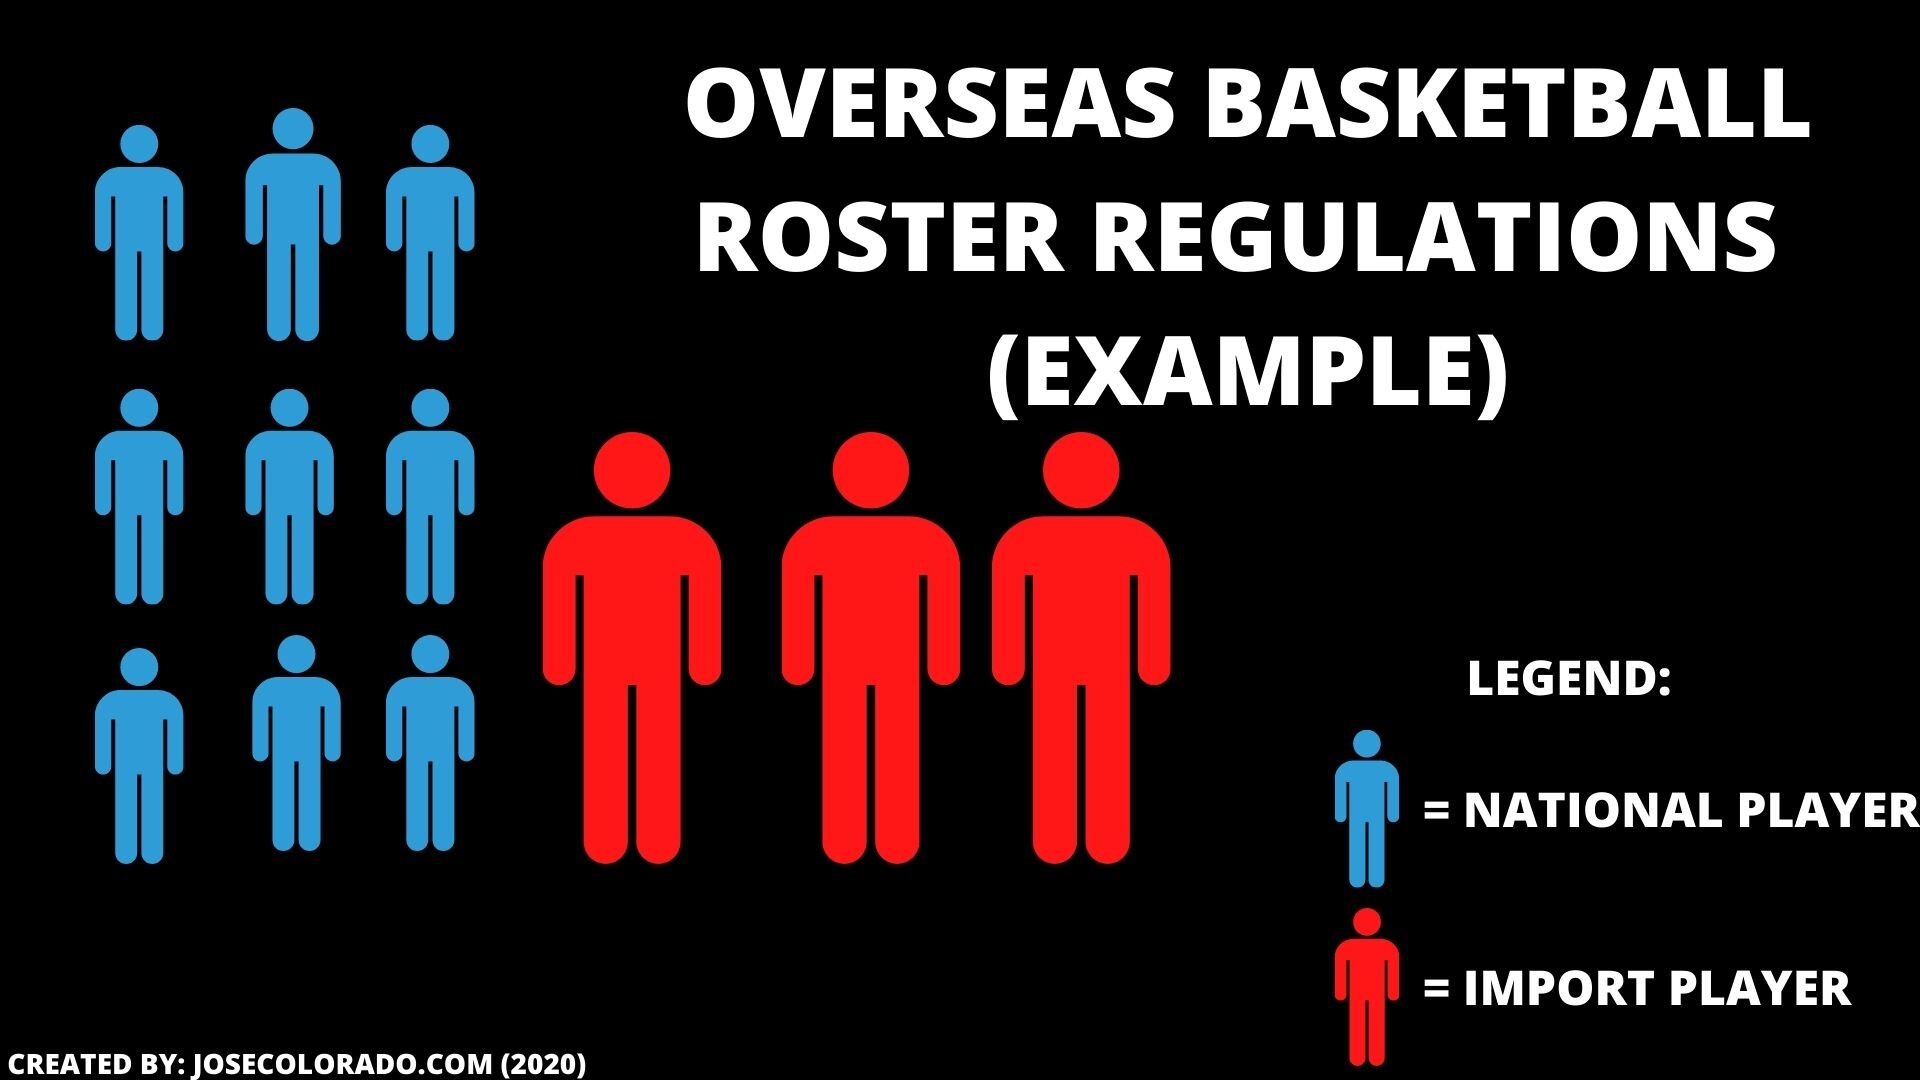 Players must understand roster regulations to understand how to play overseas basketball.